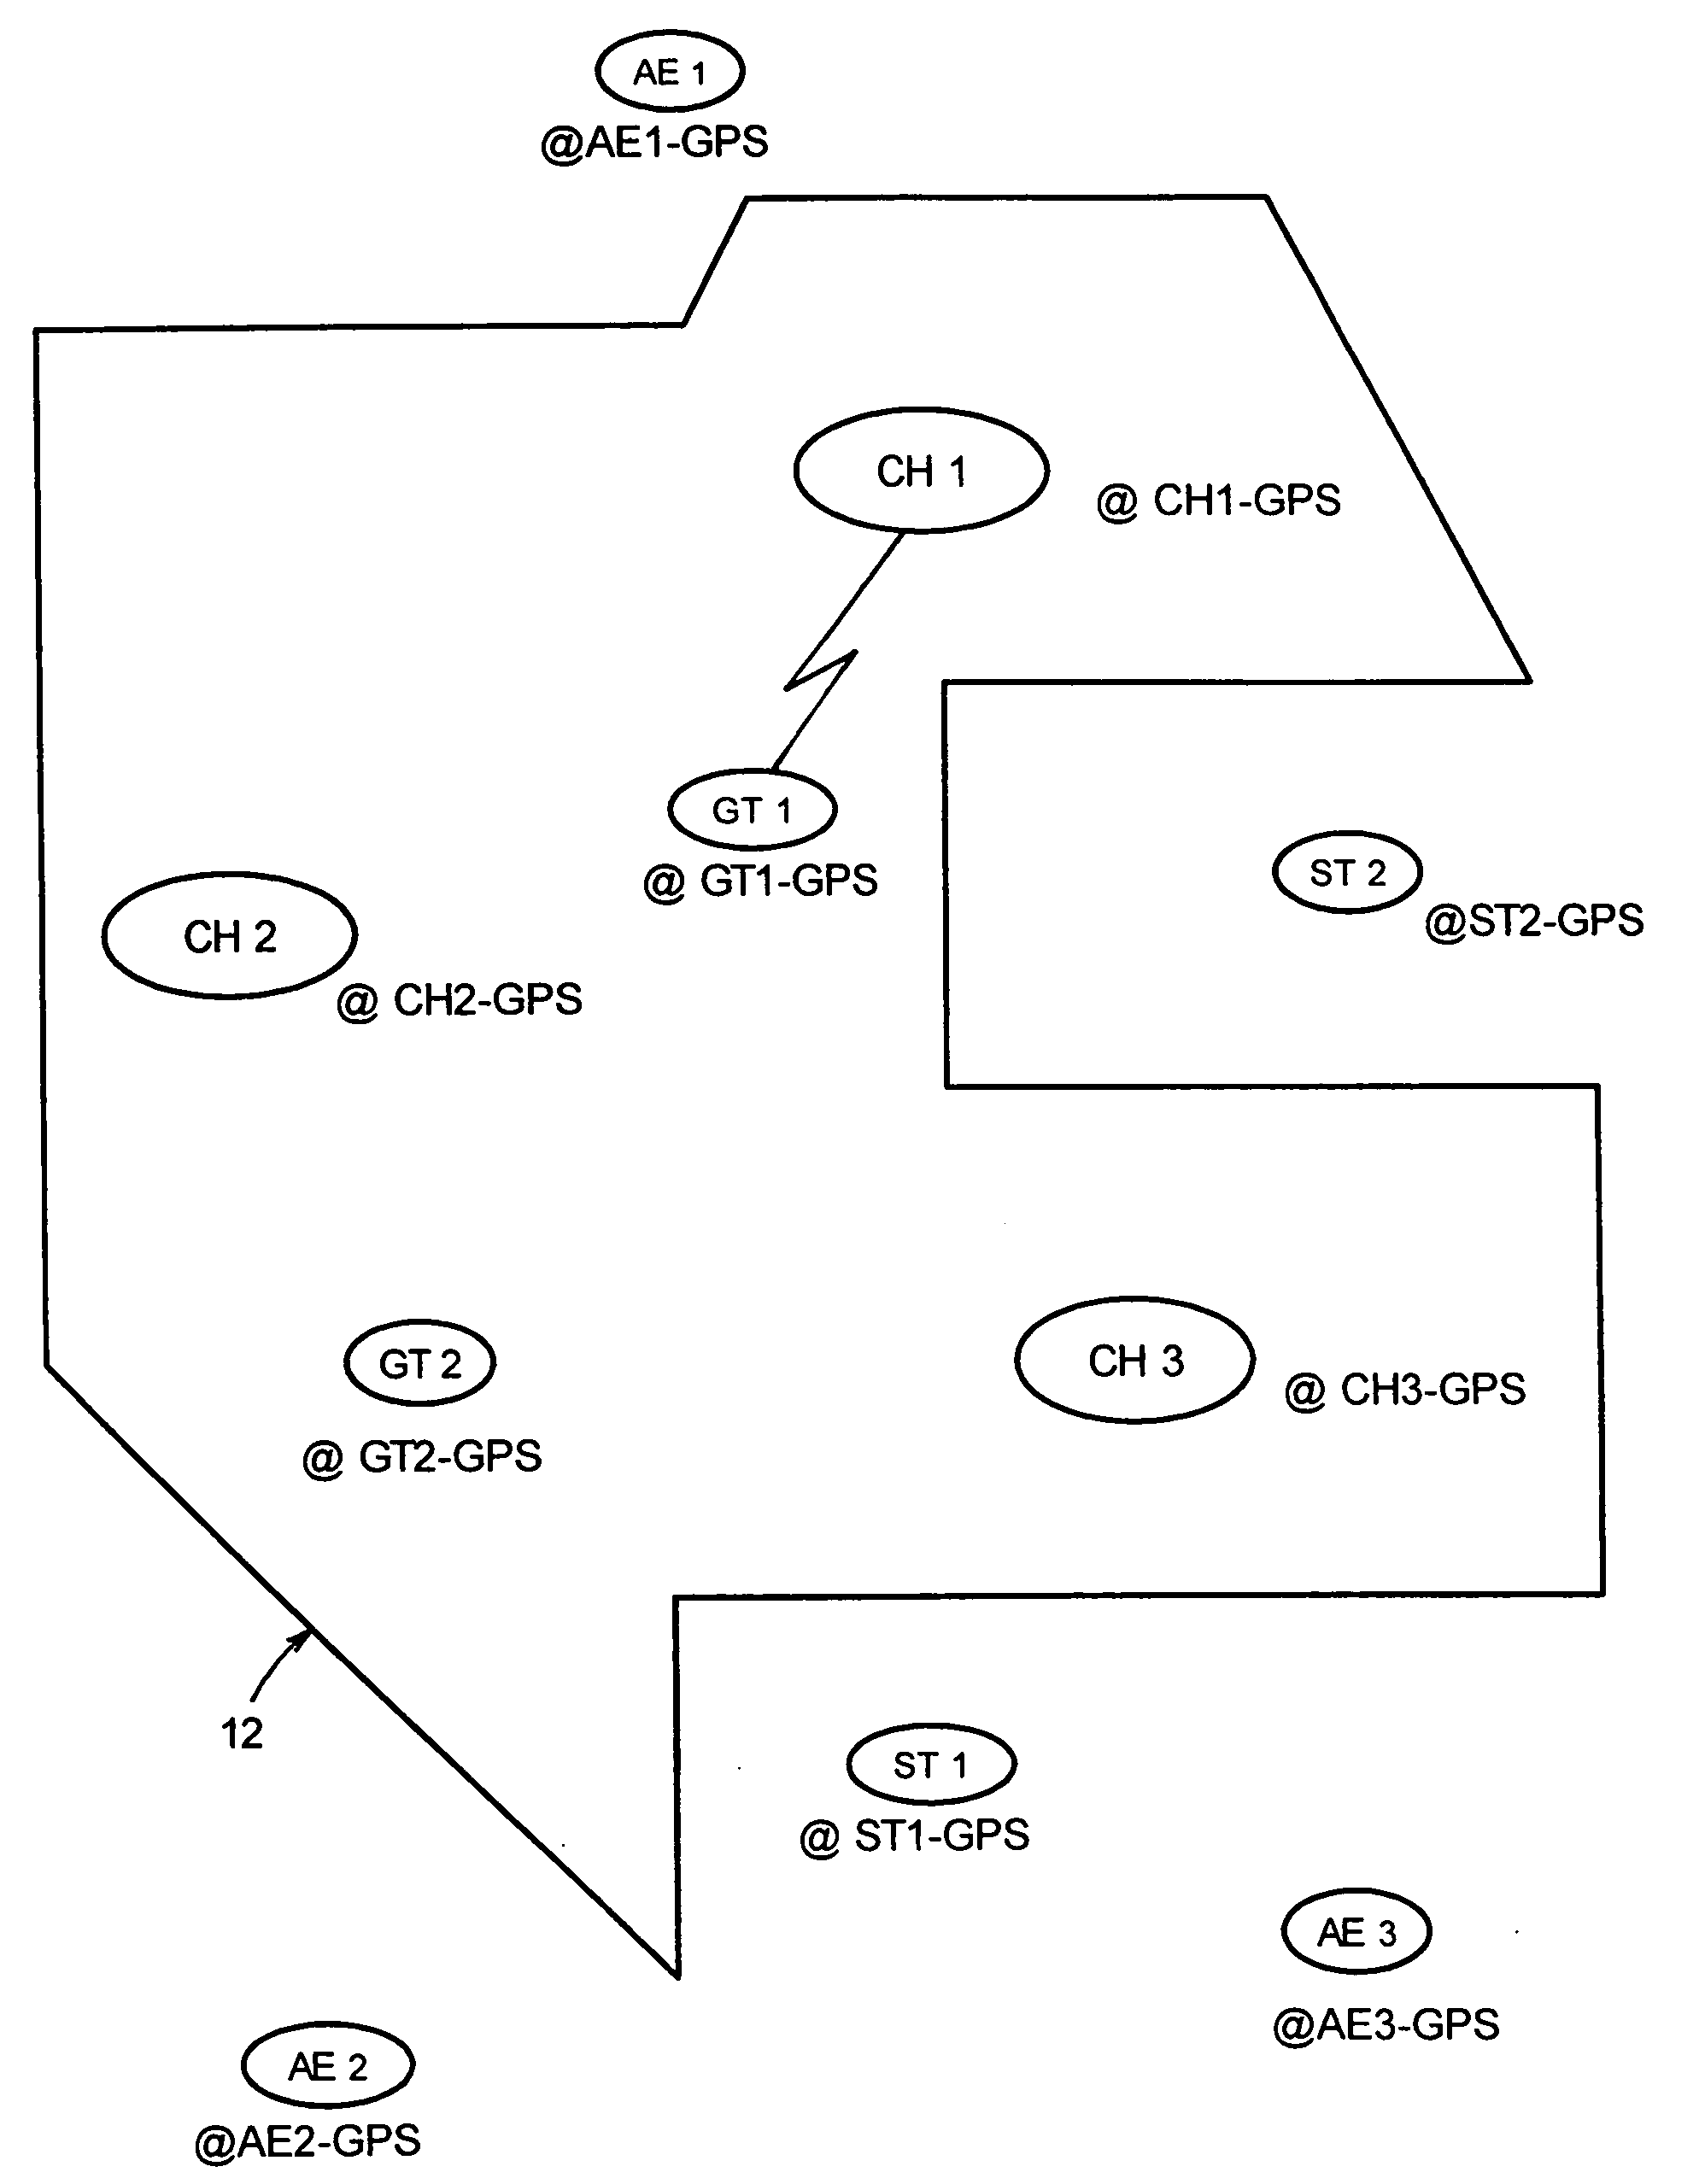 System and method employing short range communications for interactively coordinating unloading operations between a harvester and a grain transport